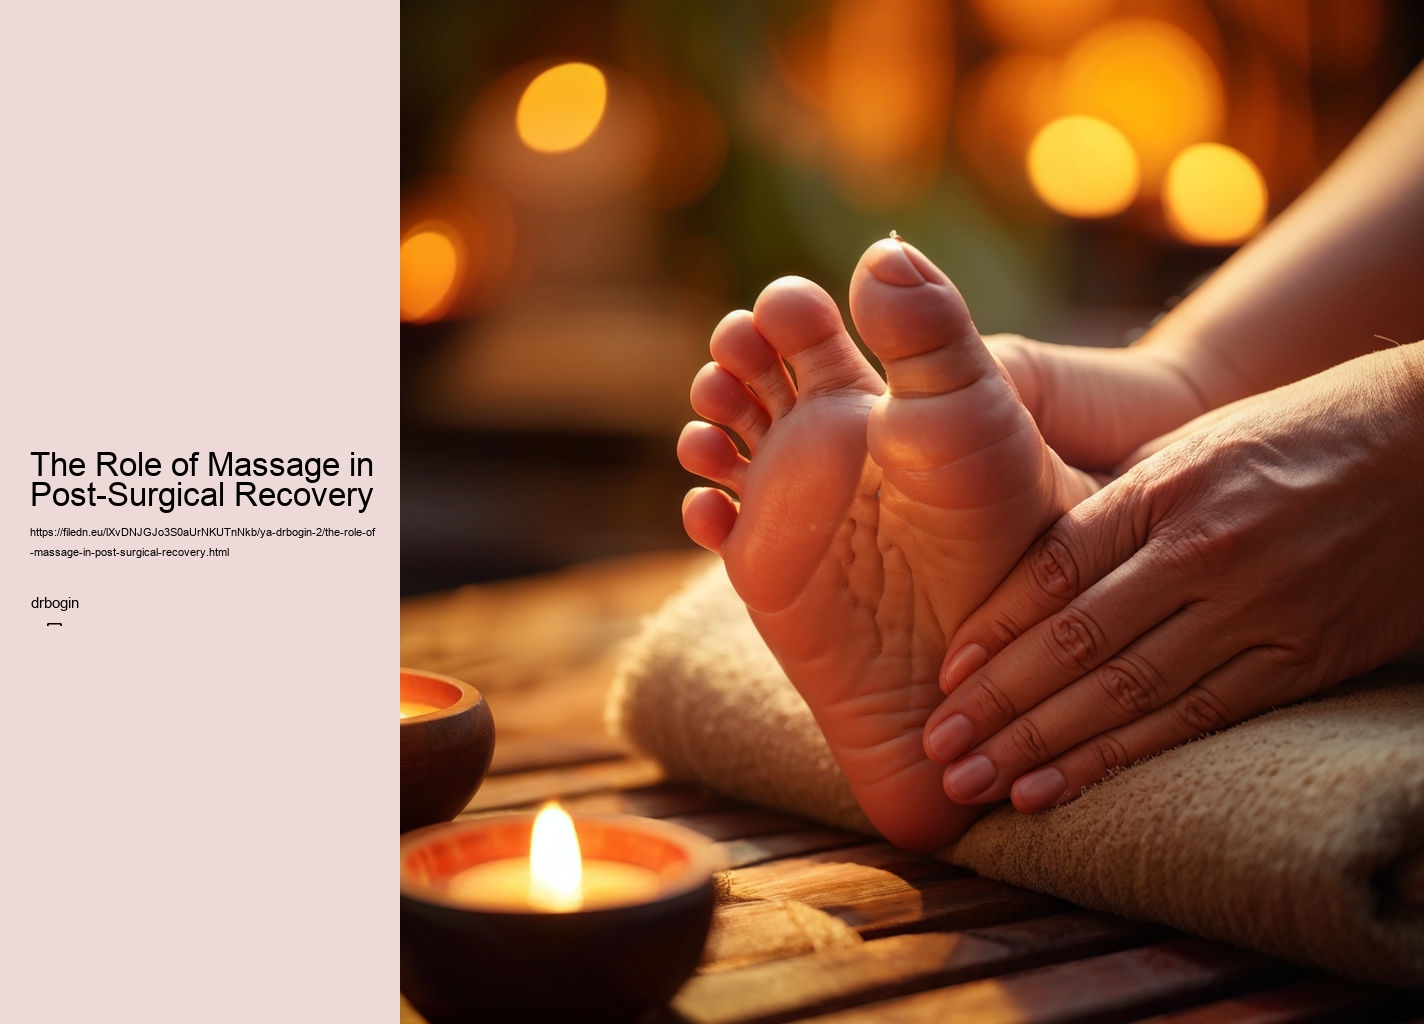 The Role of Massage in Post-Surgical Recovery